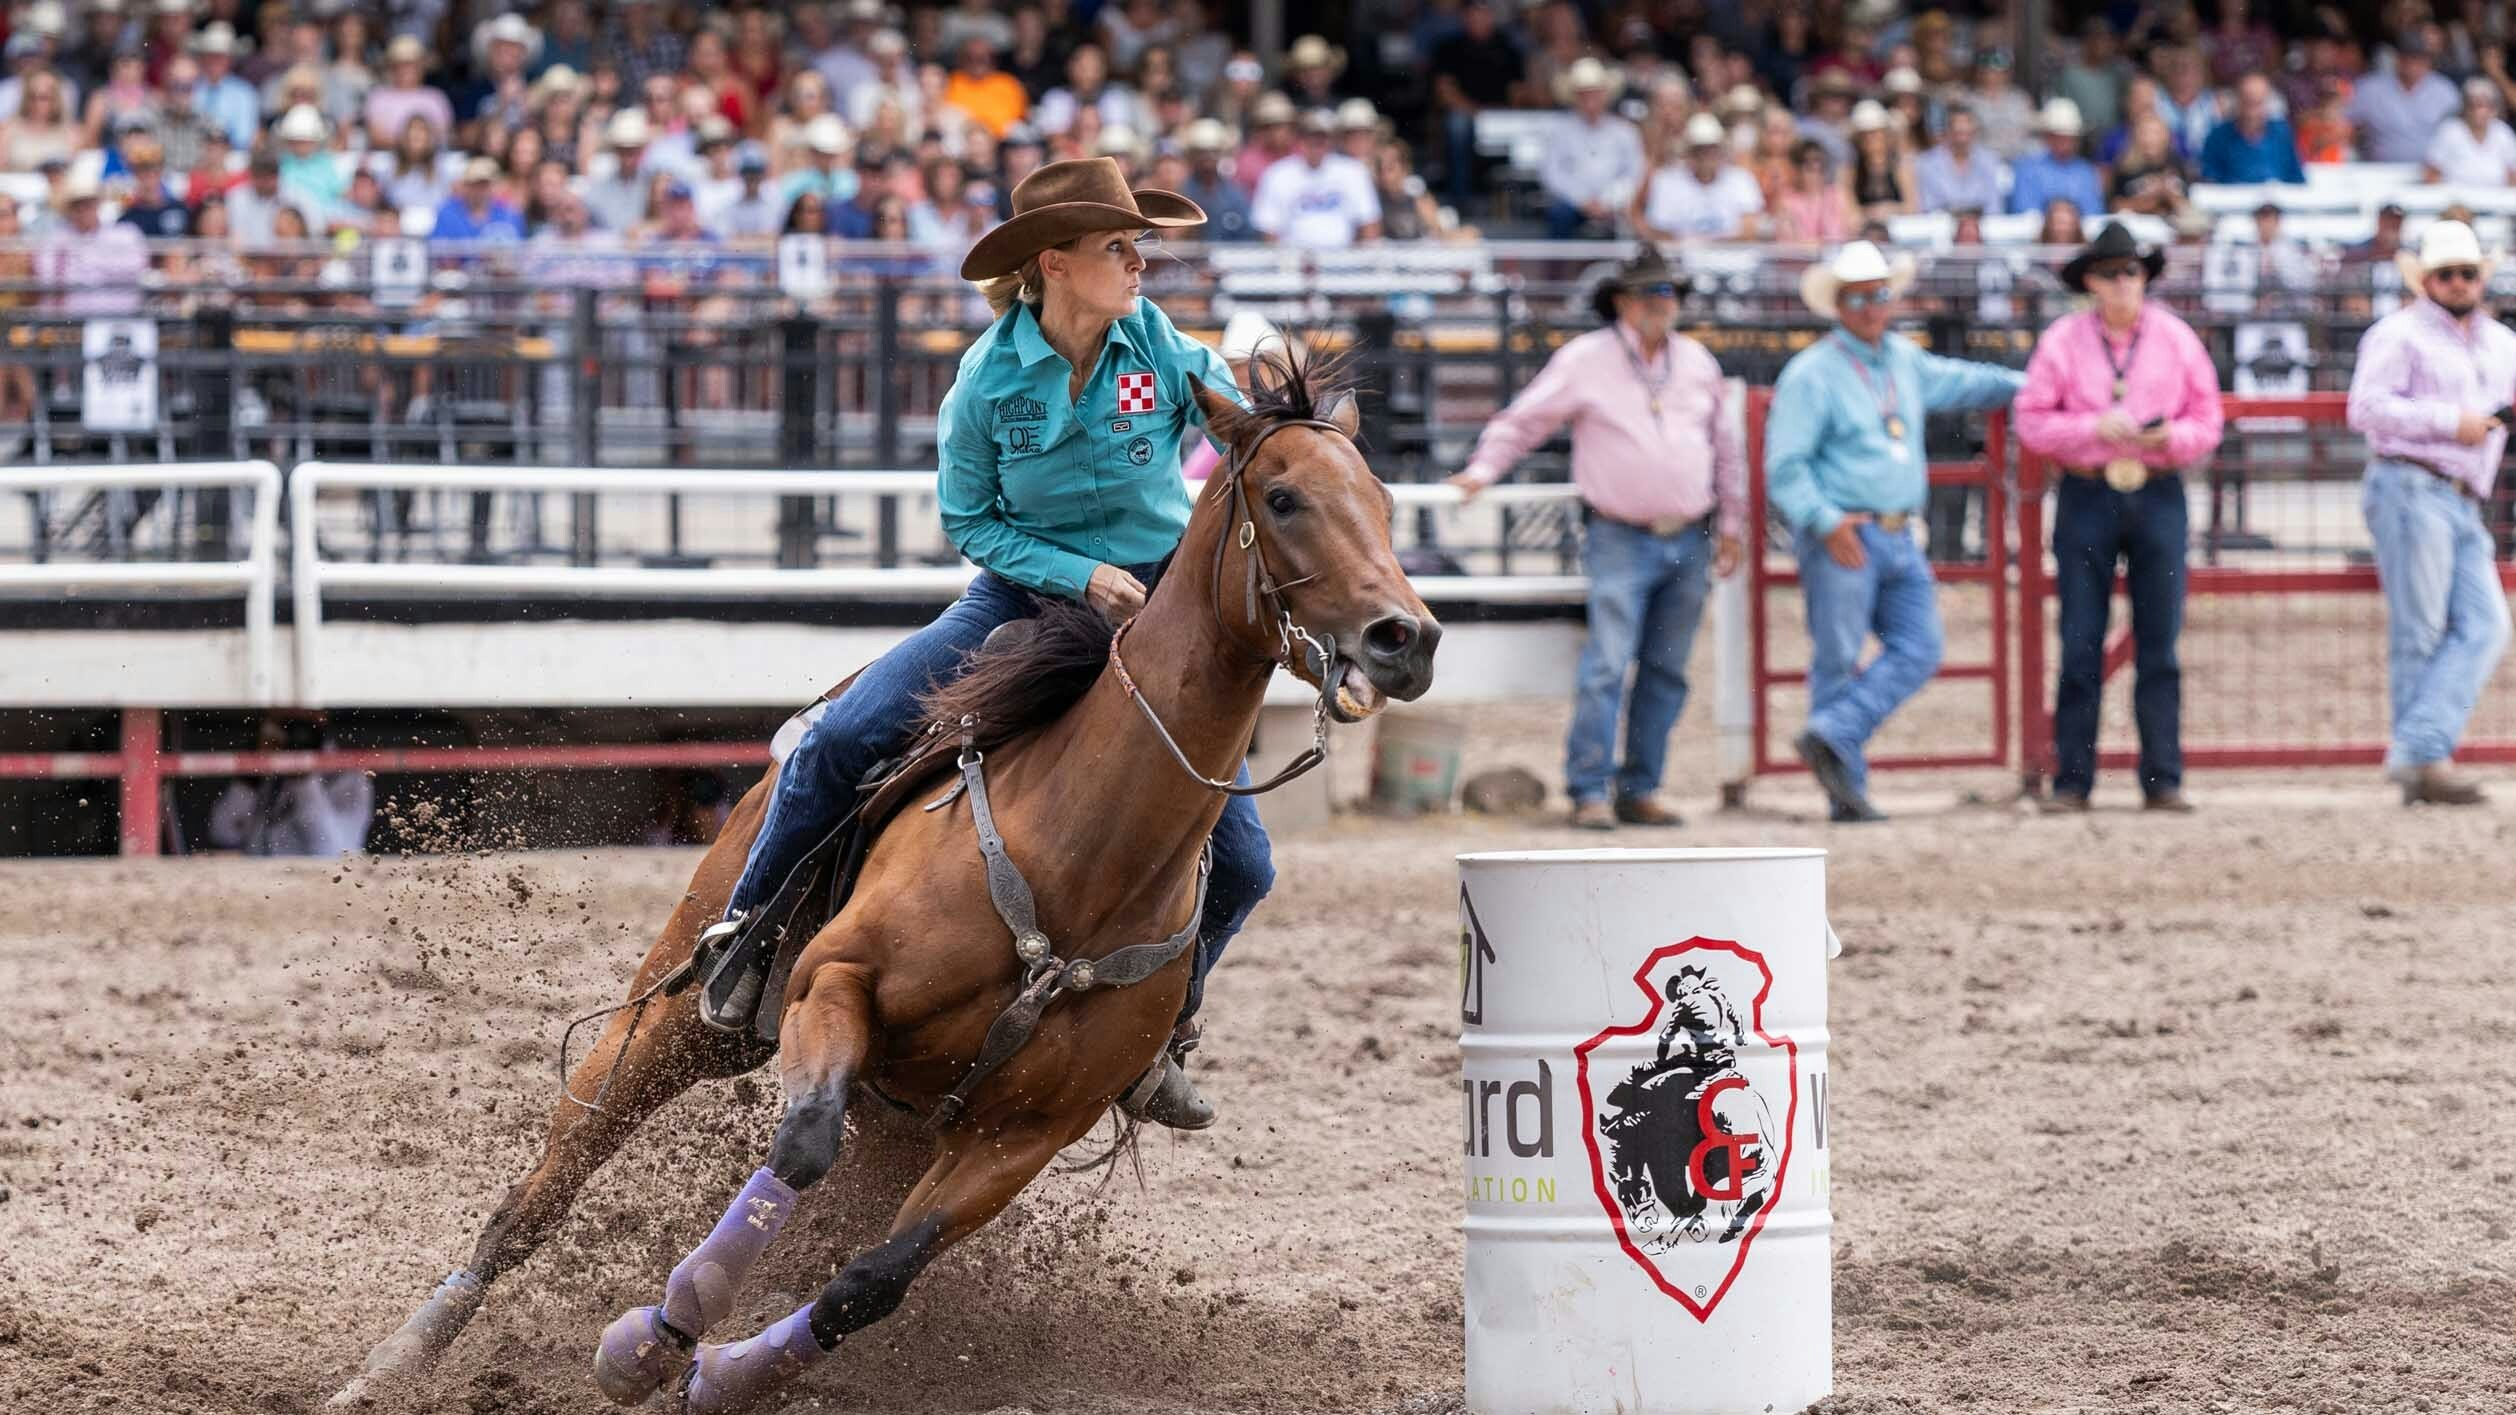 Wenda Johnson from Pawhuska, OK in the barrel racing at Cheyenne Frontier Days on July 27, 2023.